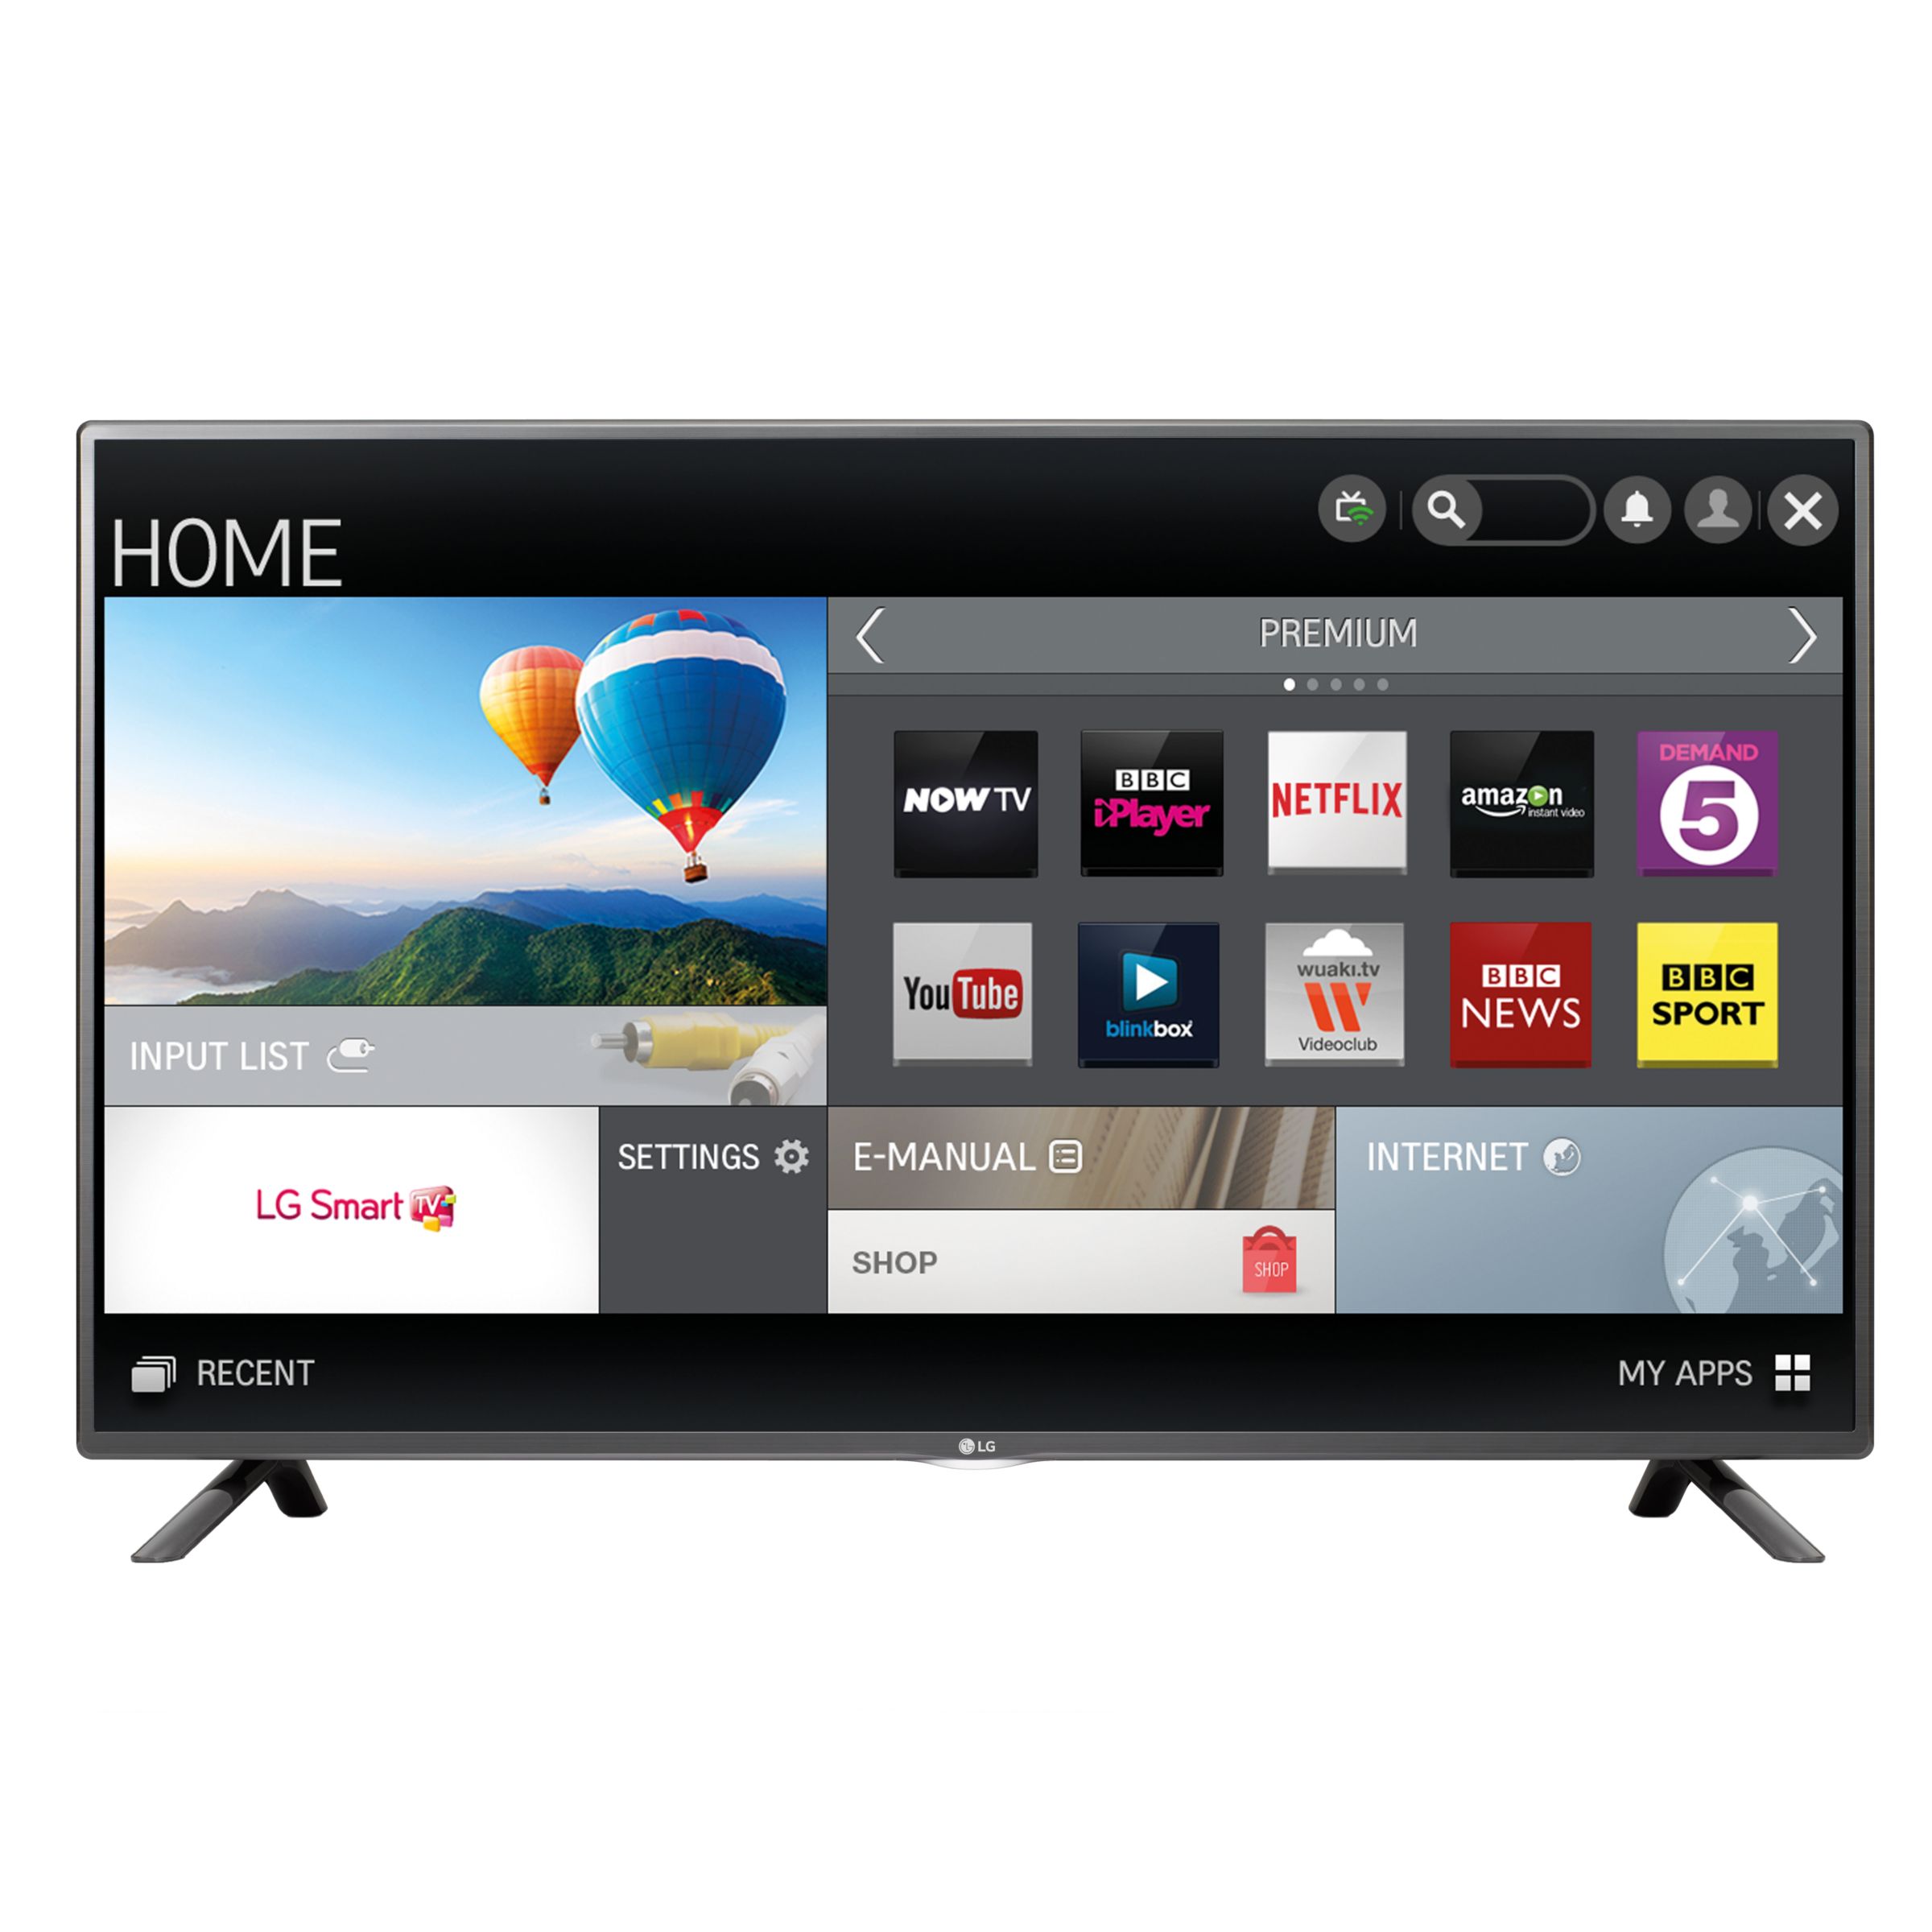 Lg 42lf580v Led Hd 1080p Smart Tv 42 With Freeview Hd And Built In Wi Fi